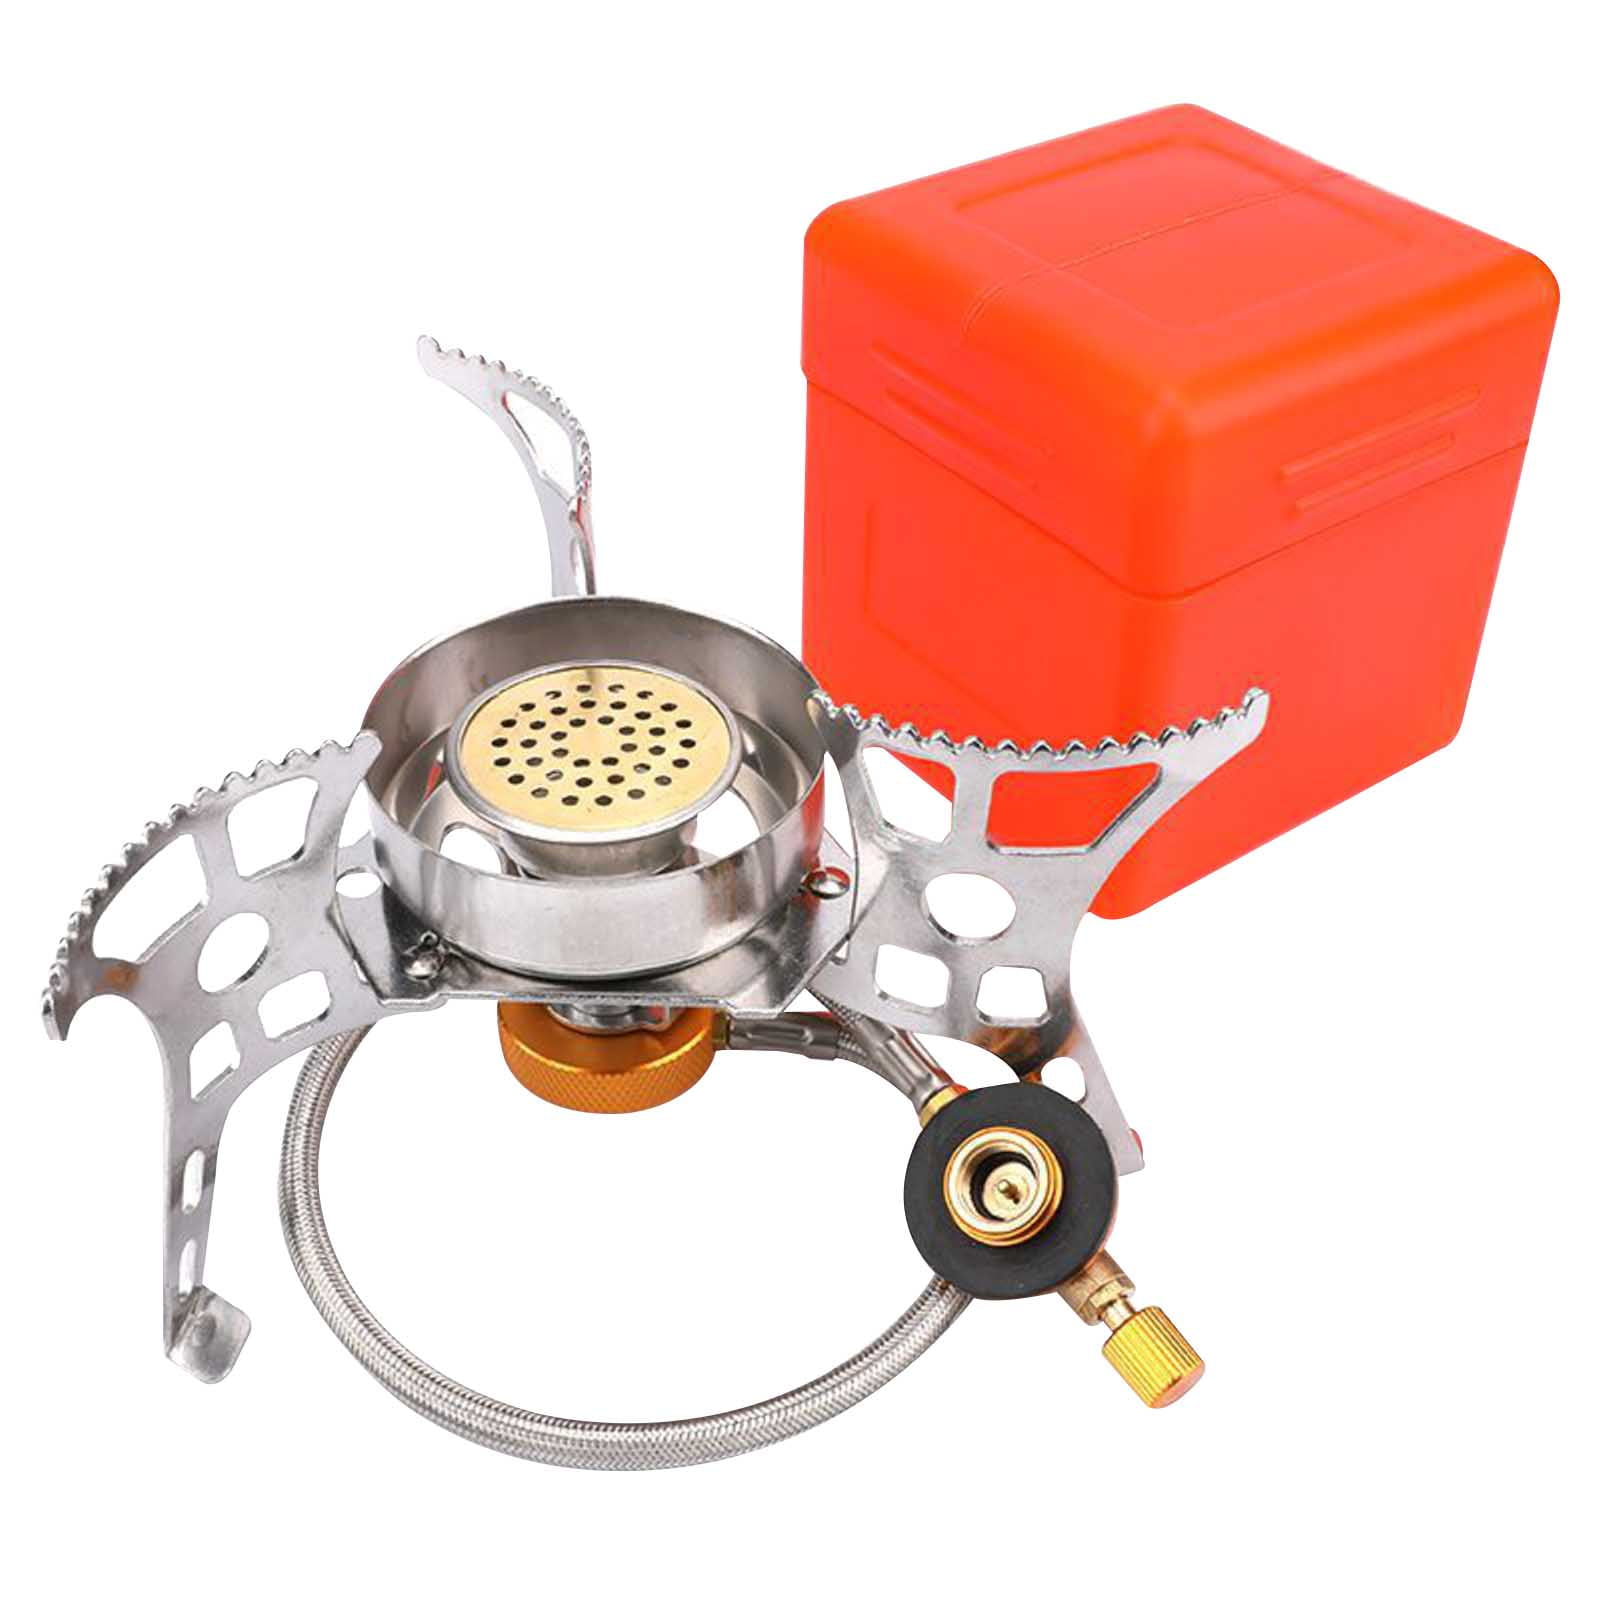 Details about   Portable Stove Stainless Steel for Outdoor Camping Fishing Picnic Accessory 